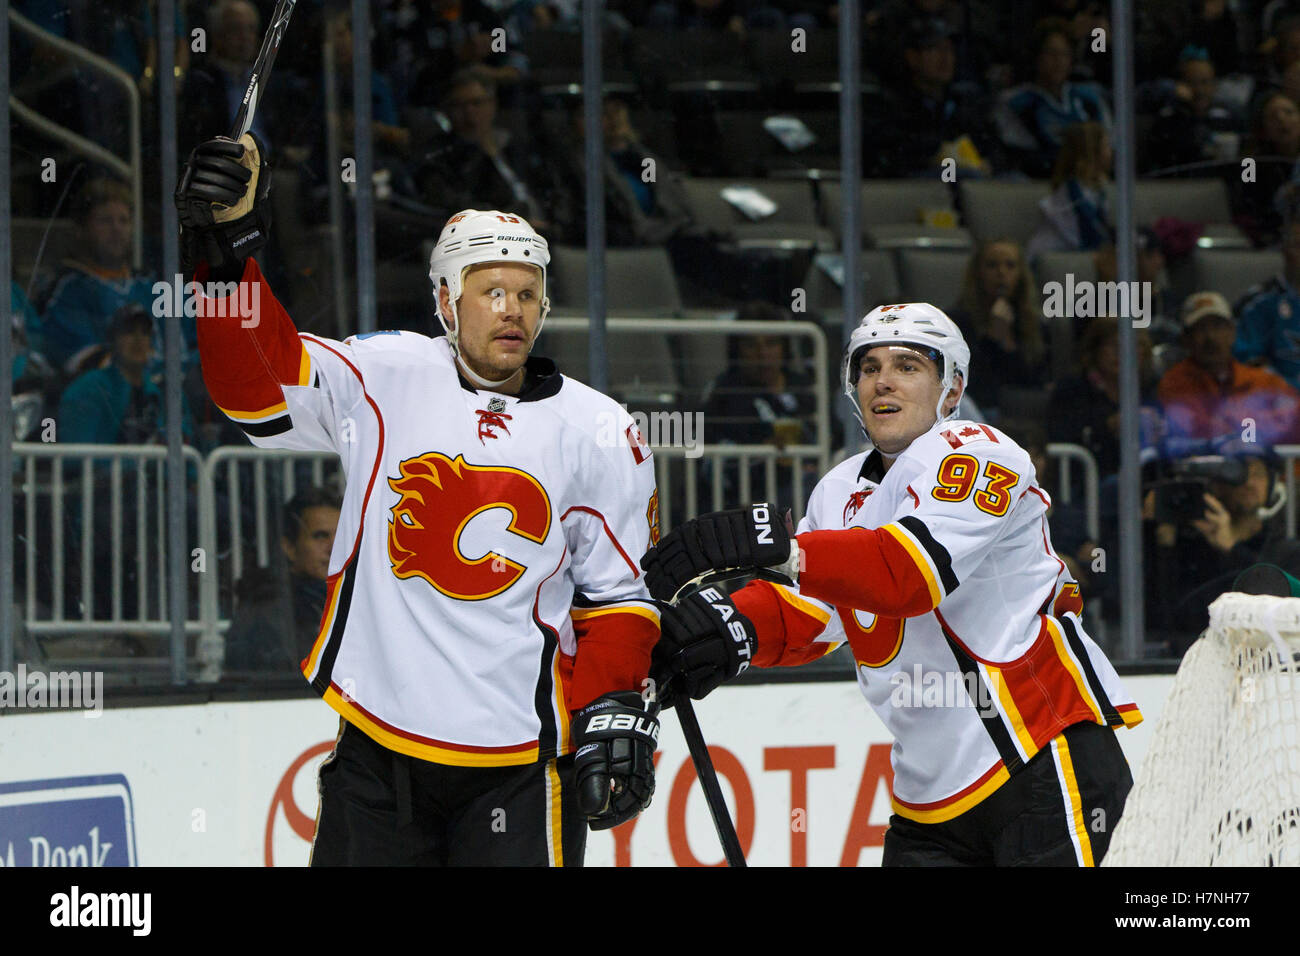 Feb 8, 2012; San Jose, CA, USA; Calgary Flames center Olli Jokinen (left) celebrates after scoring a goal against the San Jose Sharks during the second period at HP Pavilion. Stock Photo